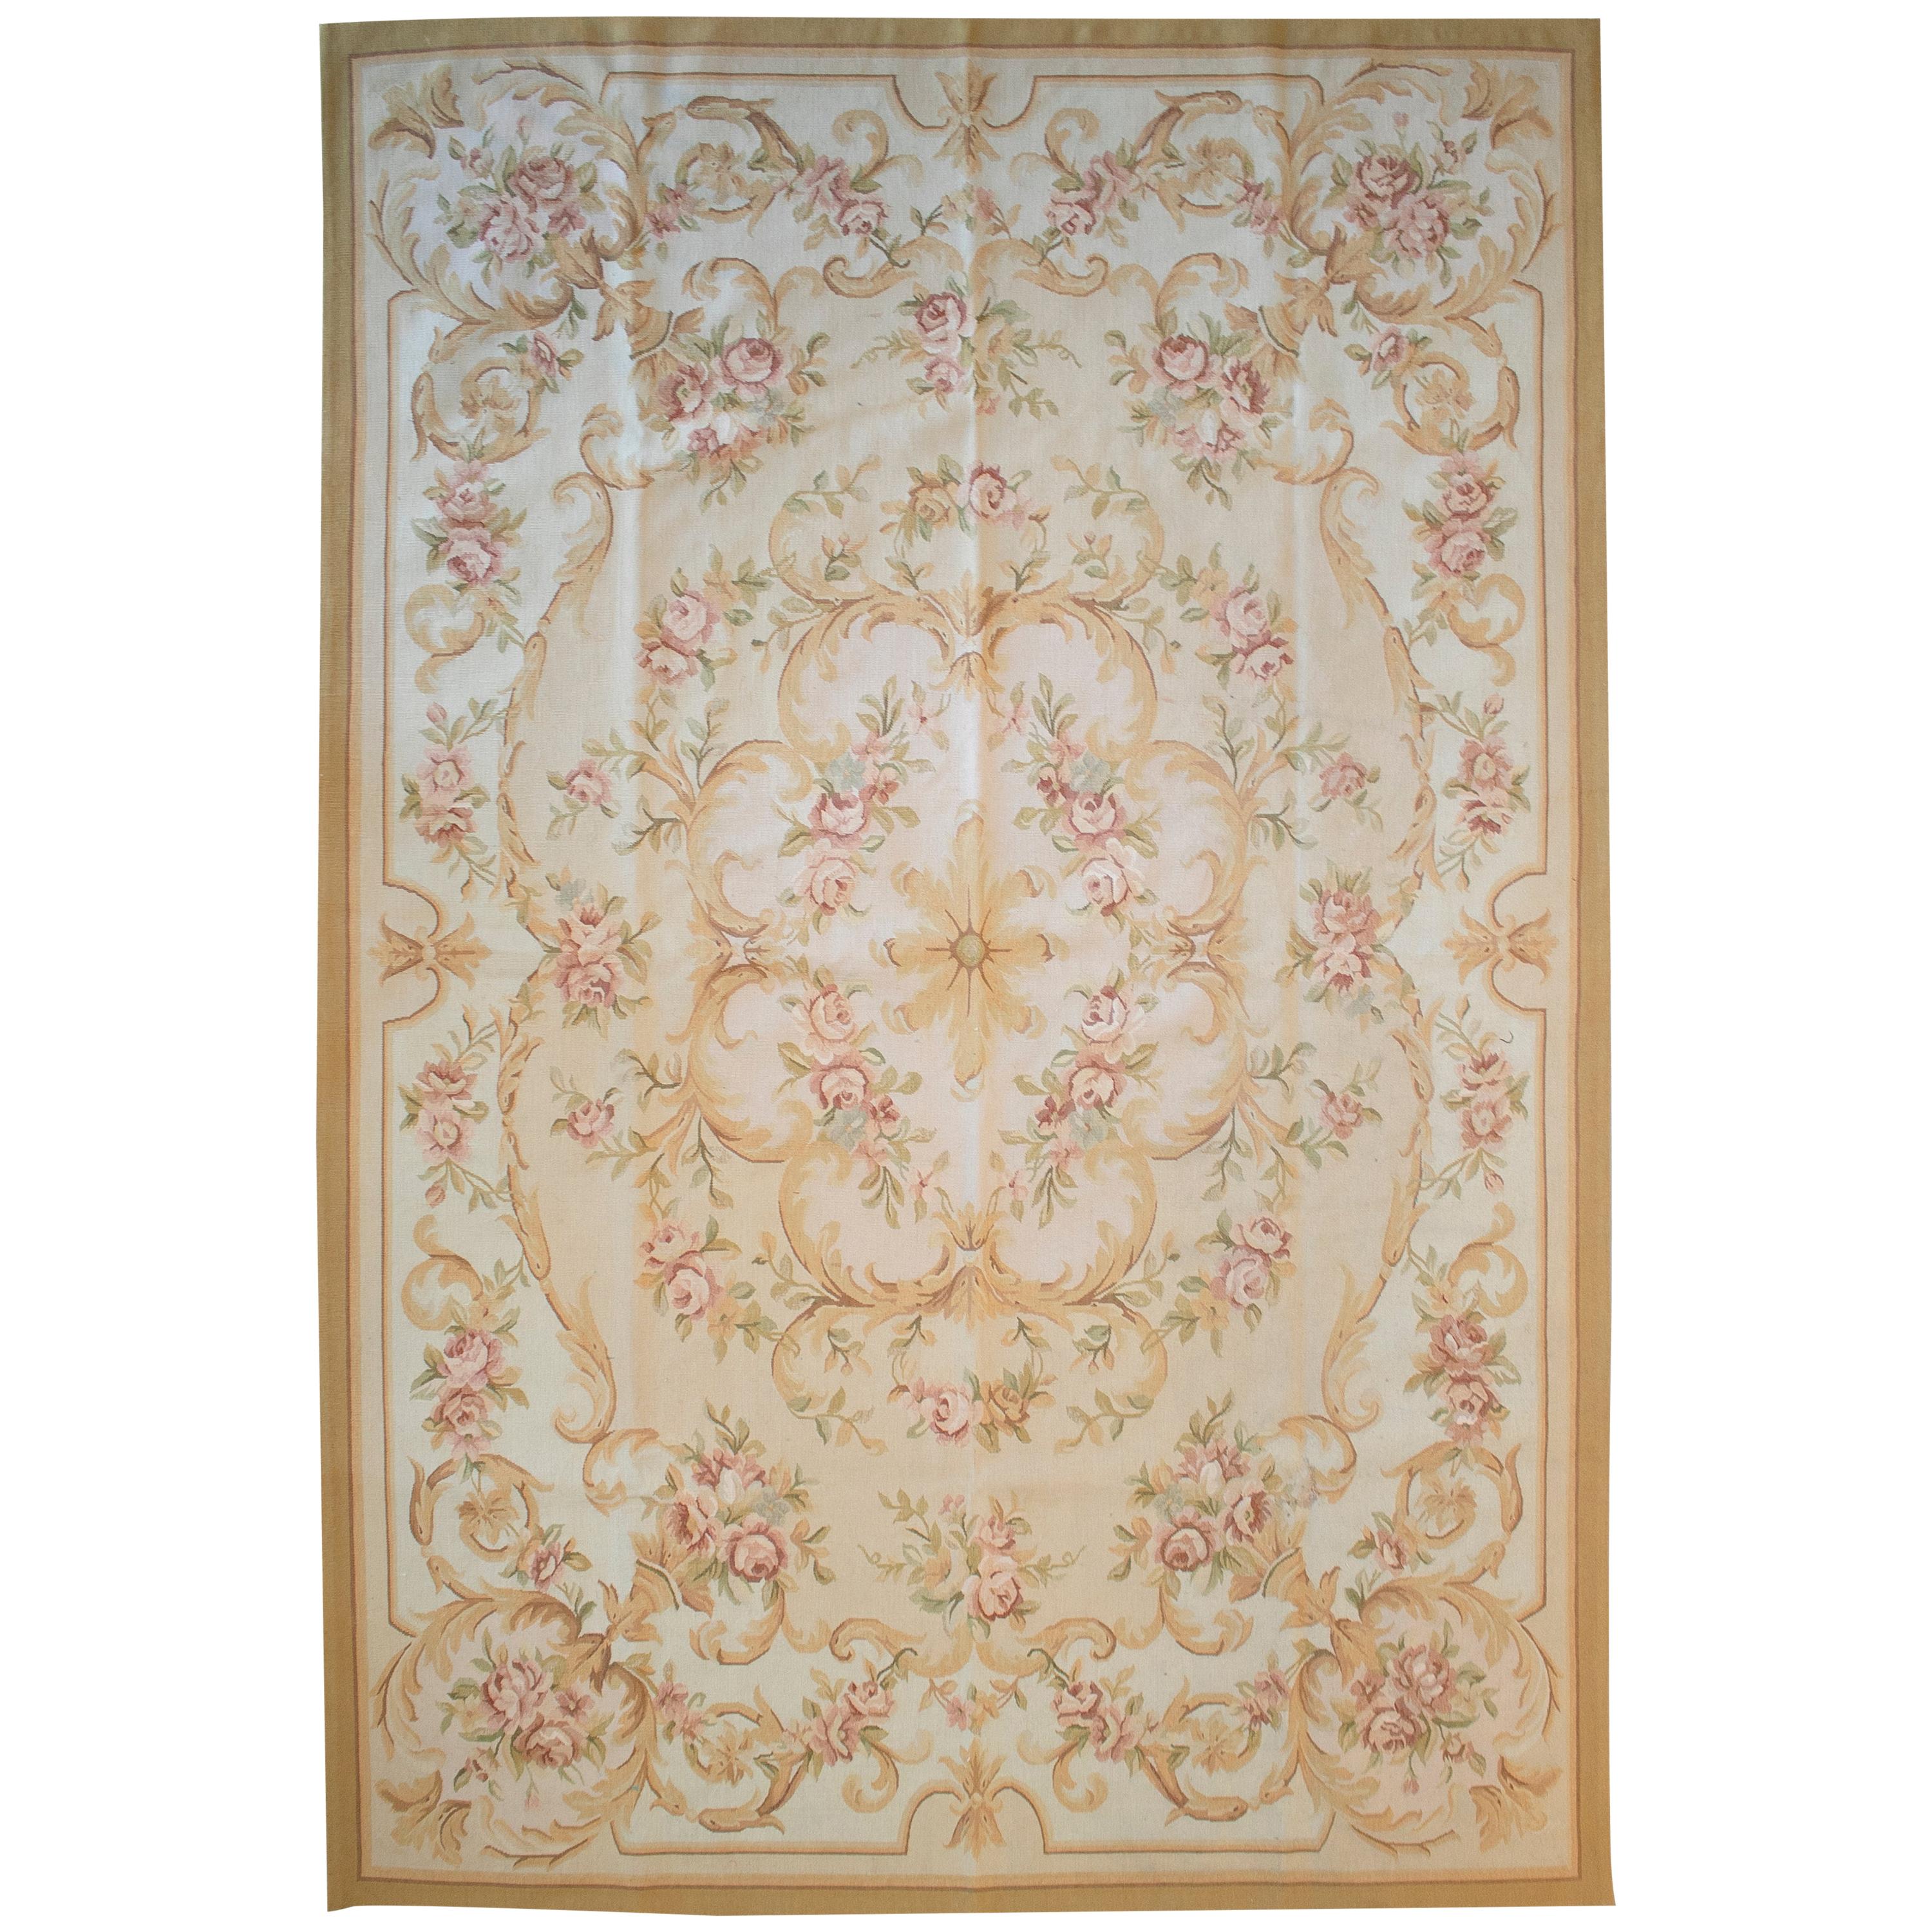 1990s French Hand Woven Beige Aubusson Carpet with Ornamental Flower Decorations